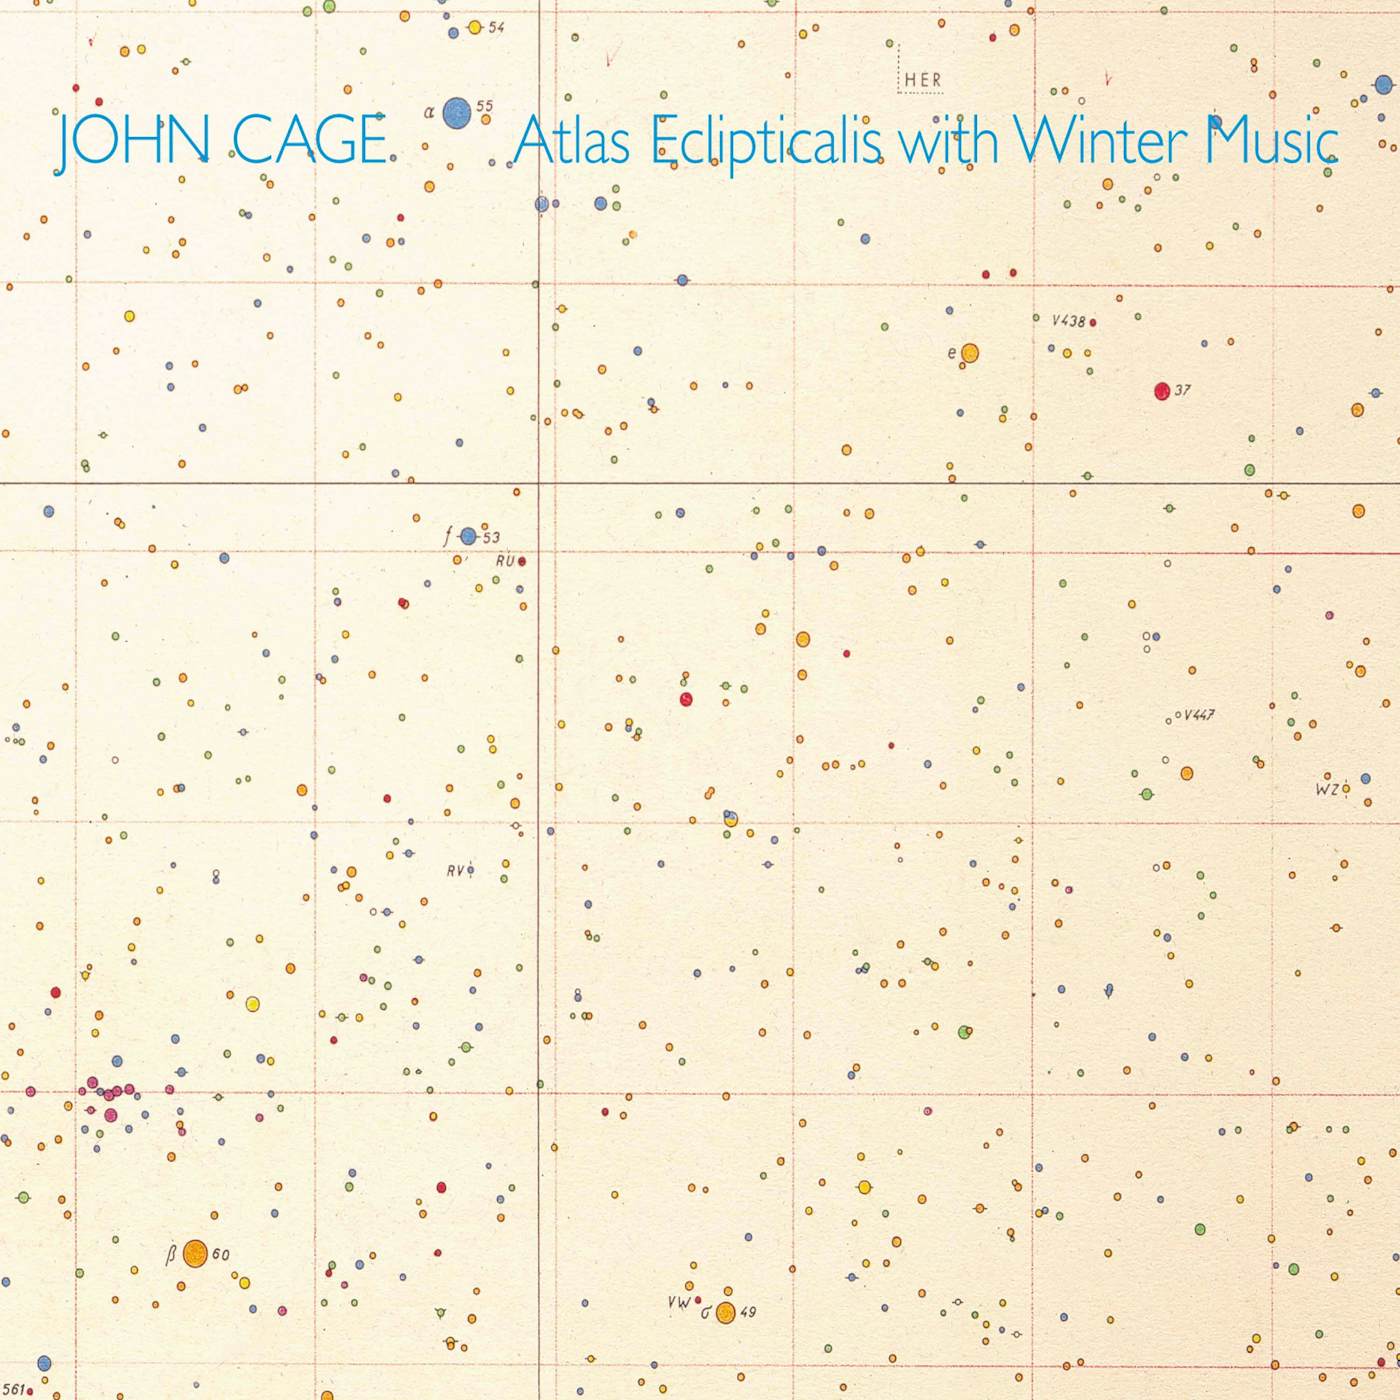 John Cage ATLAS ECLIPTICALIS WITH WINTER MUSIC CD